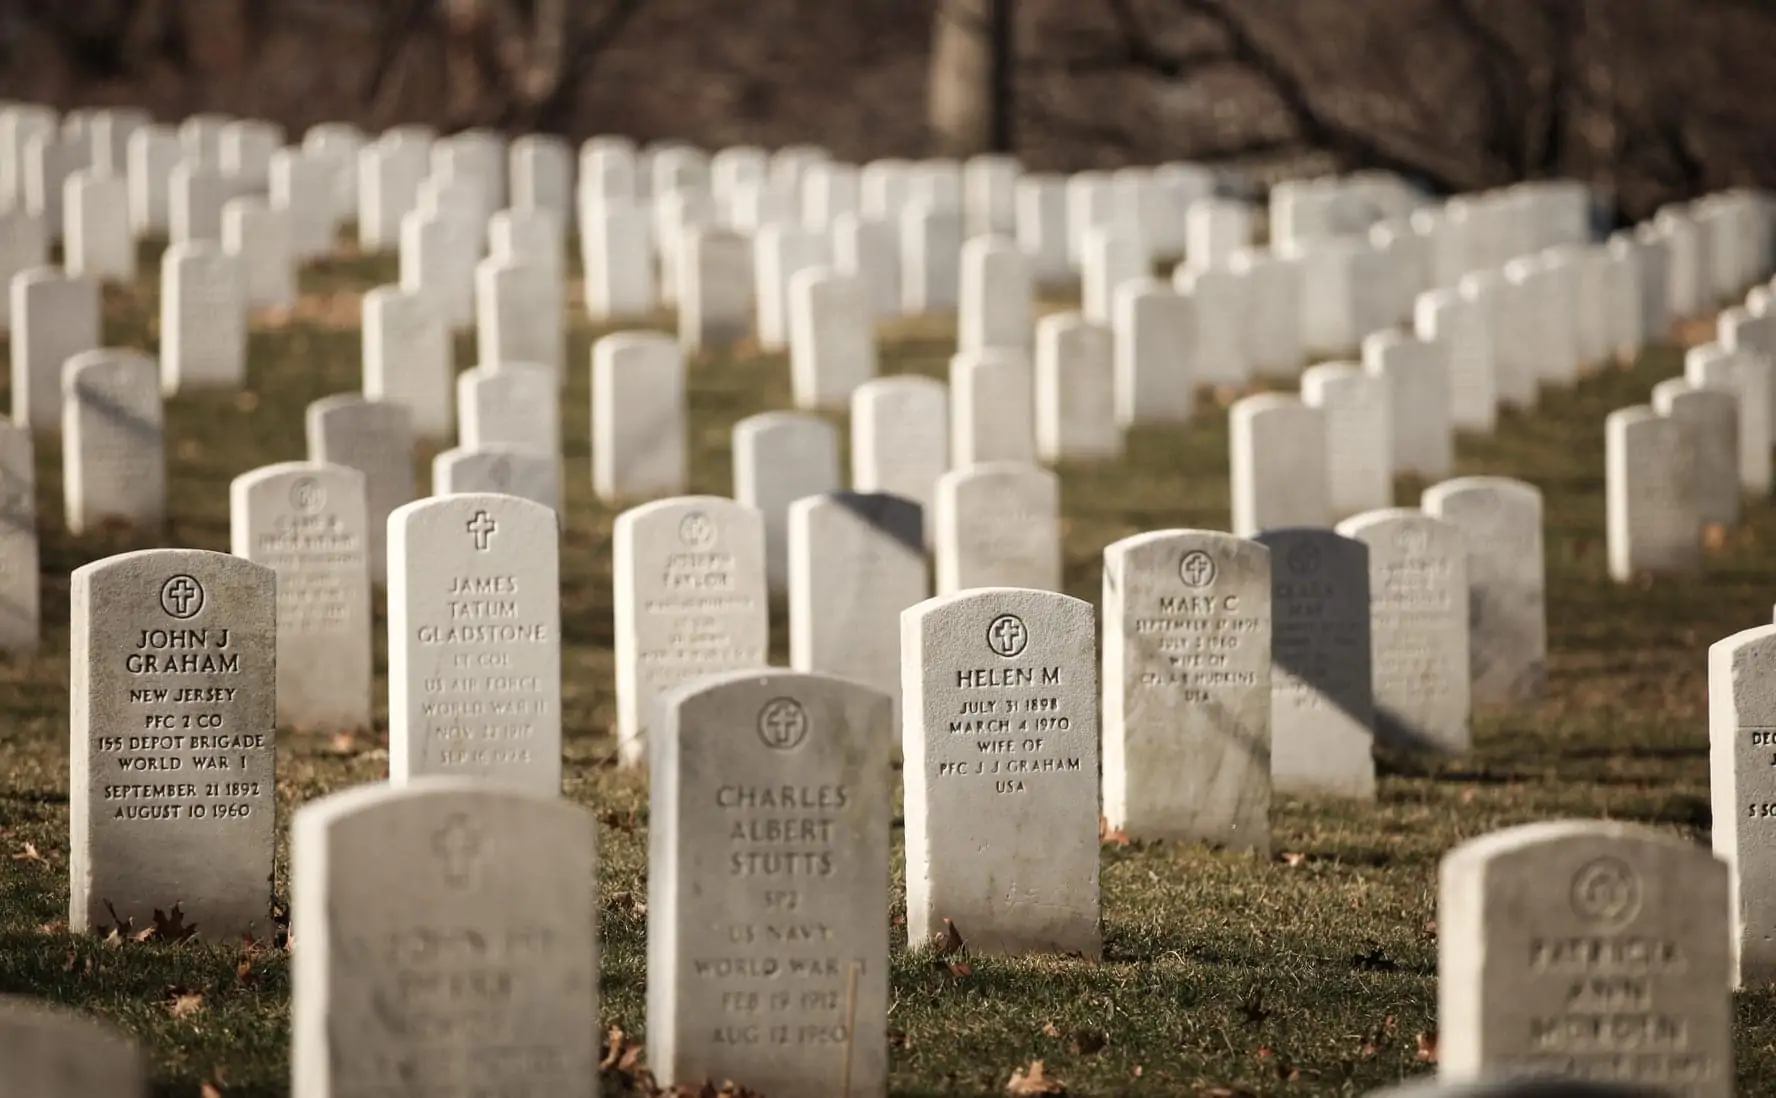 Graves at Arlington National Cemetery, where the brother of Jose Rojas, a Seventh-day Adventist pastor, was honored recently. Photo: Evan Bambrick